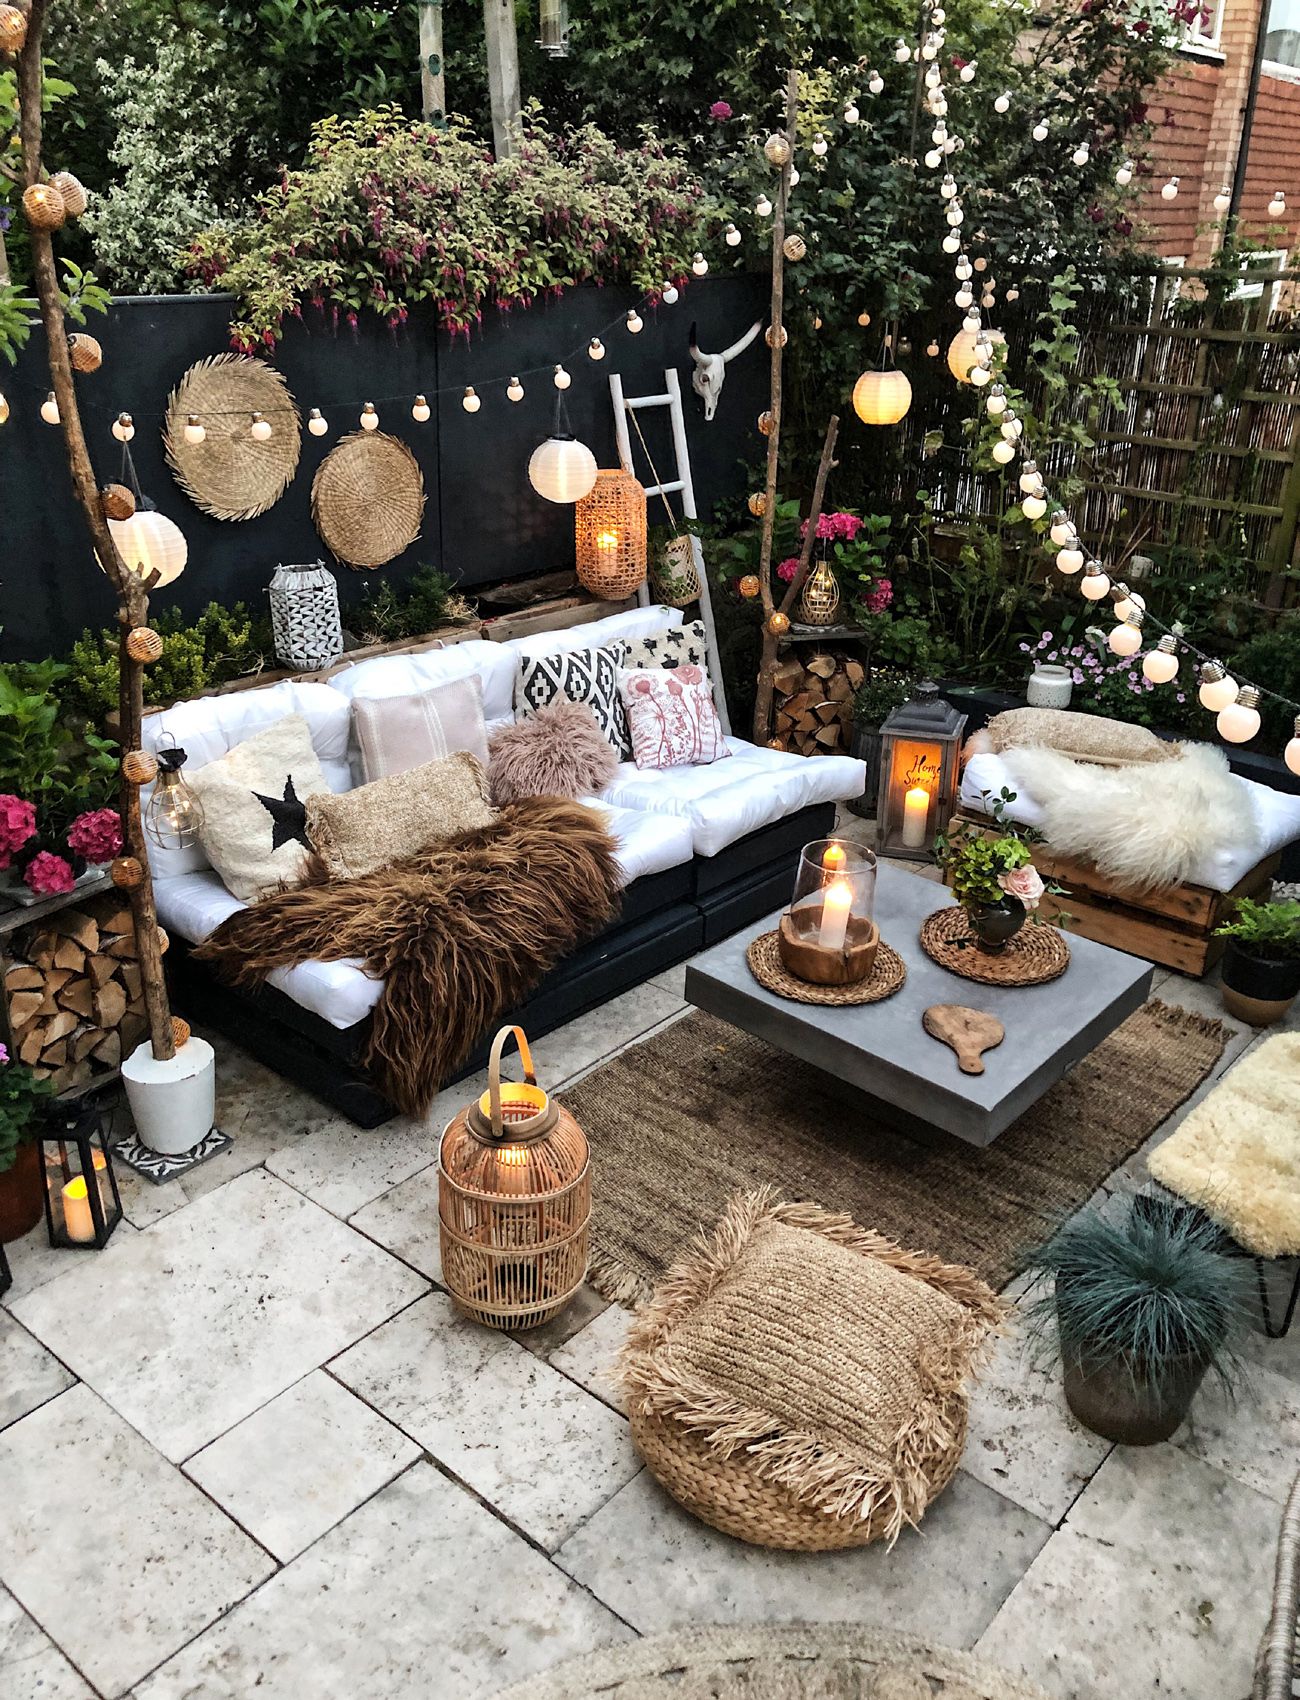 Illuminate Your Outdoor Space: Choosing
the Best Patio Lights